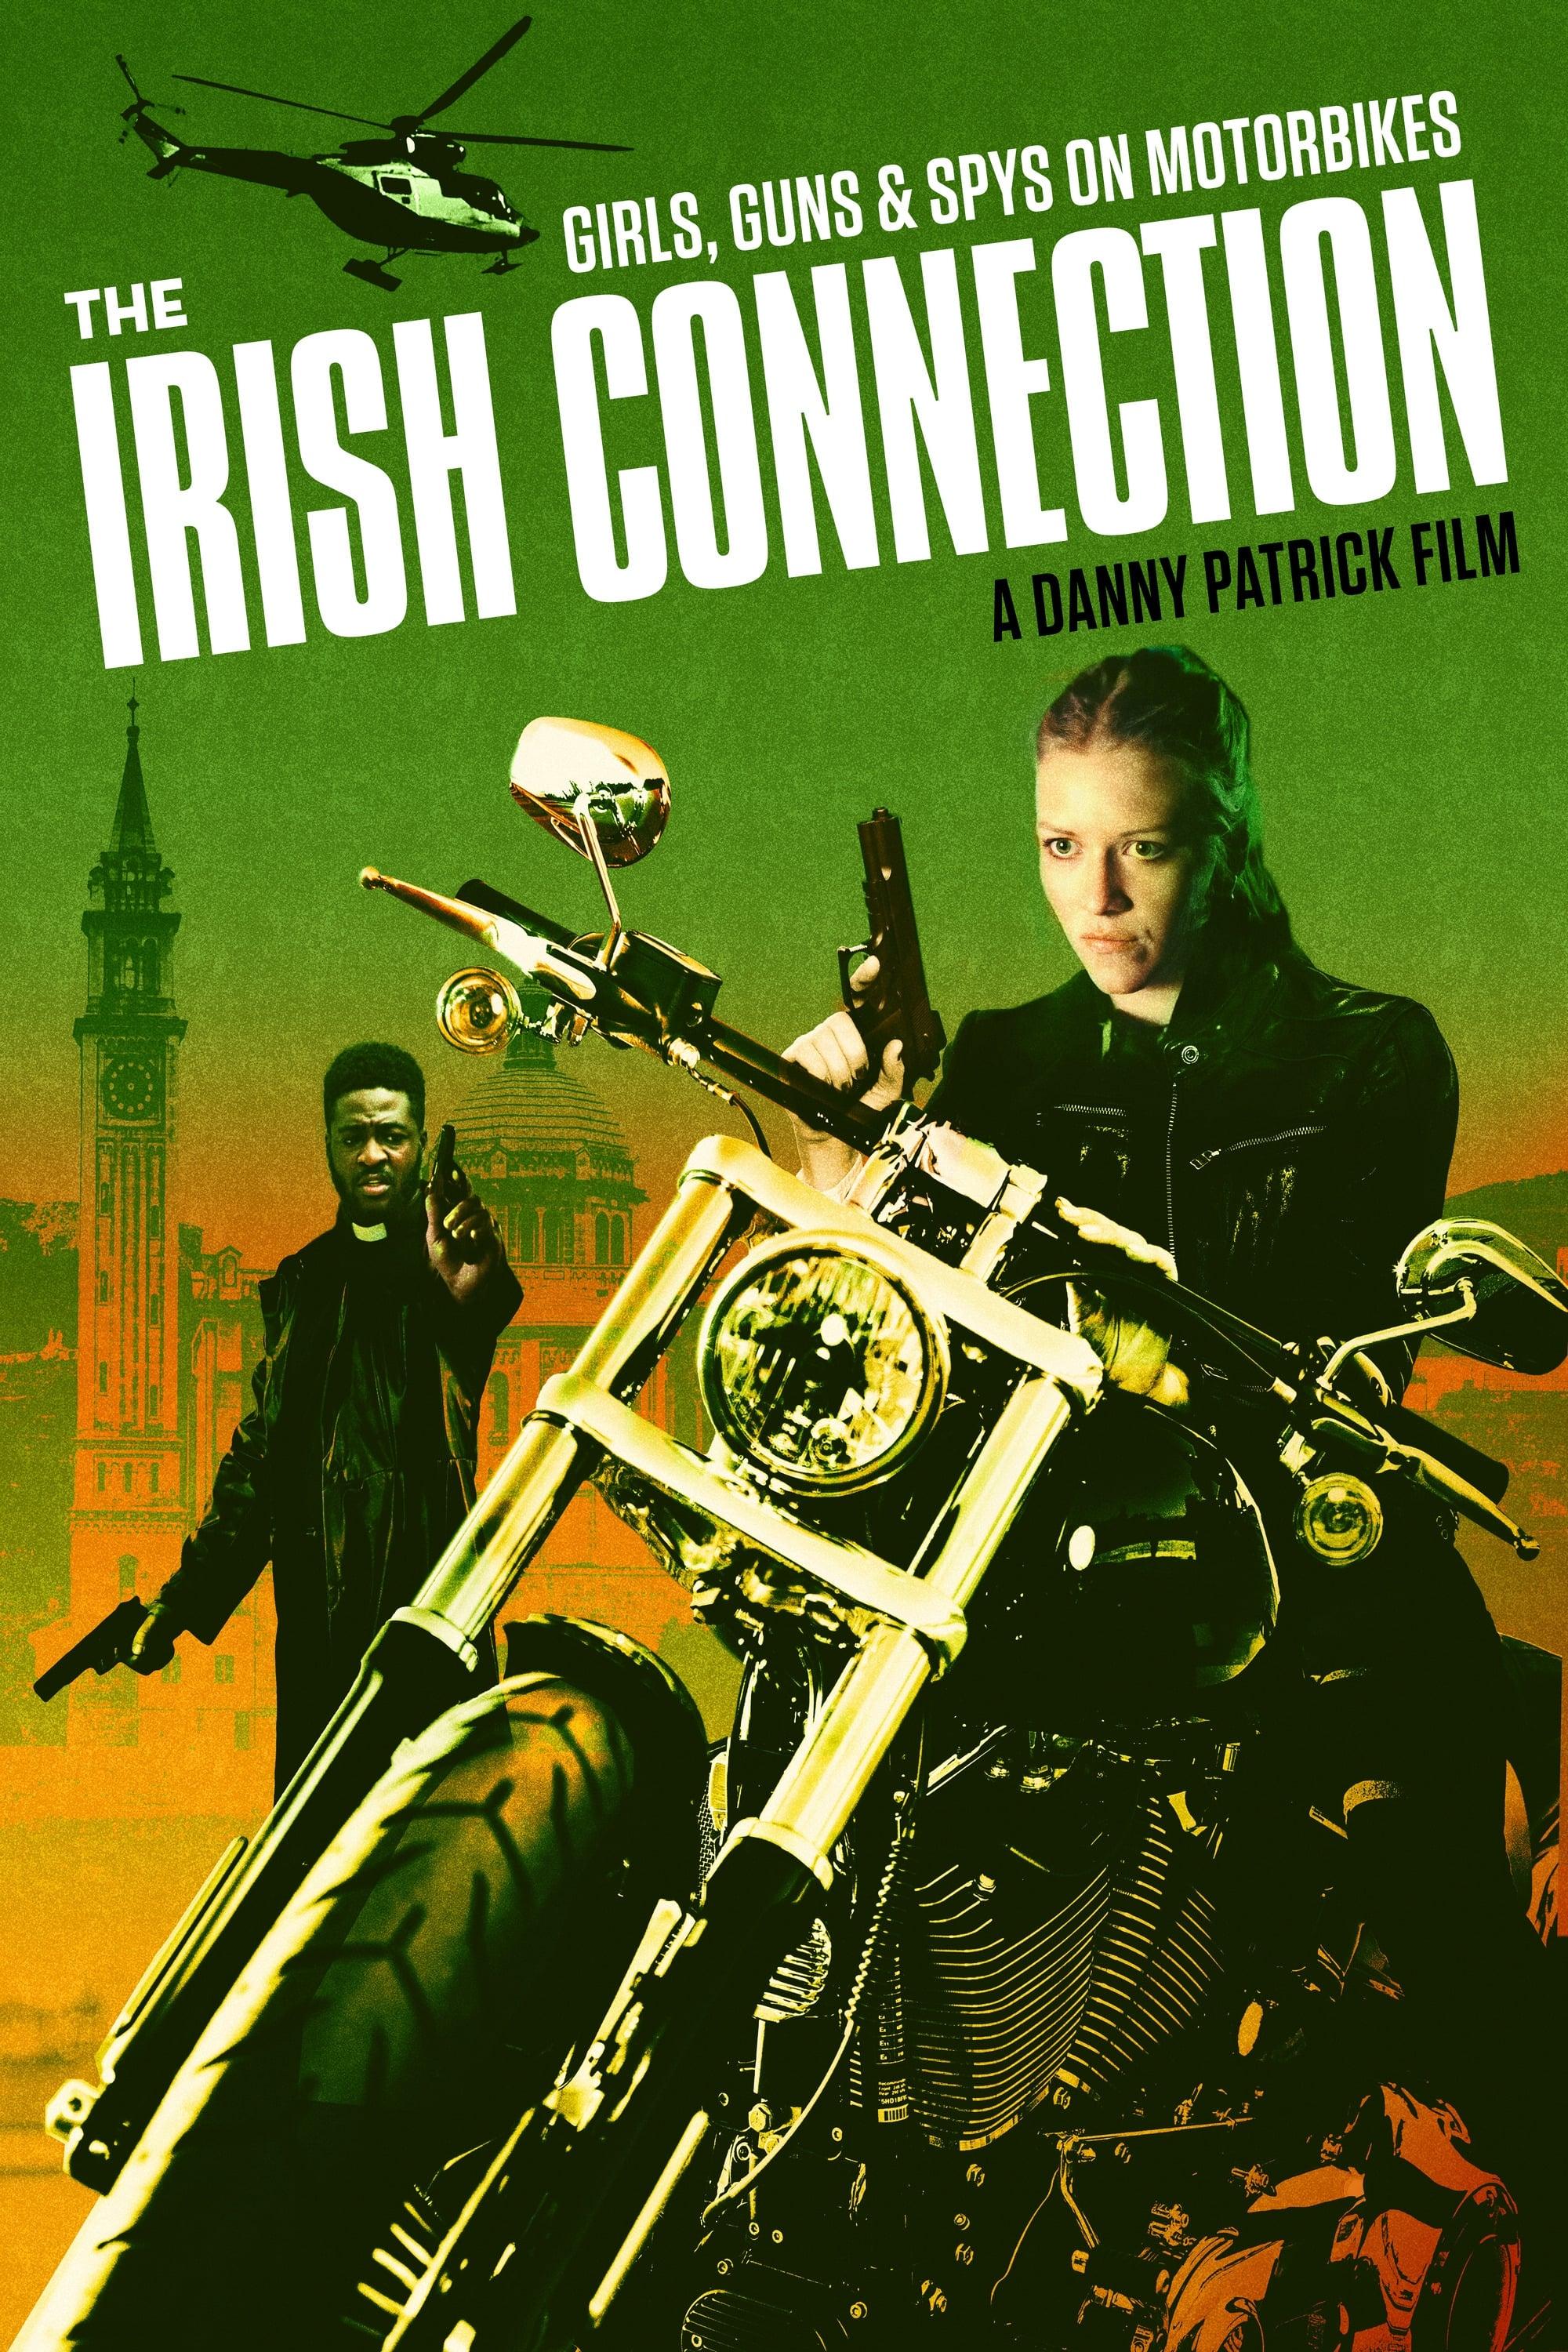 The Irish Connection poster